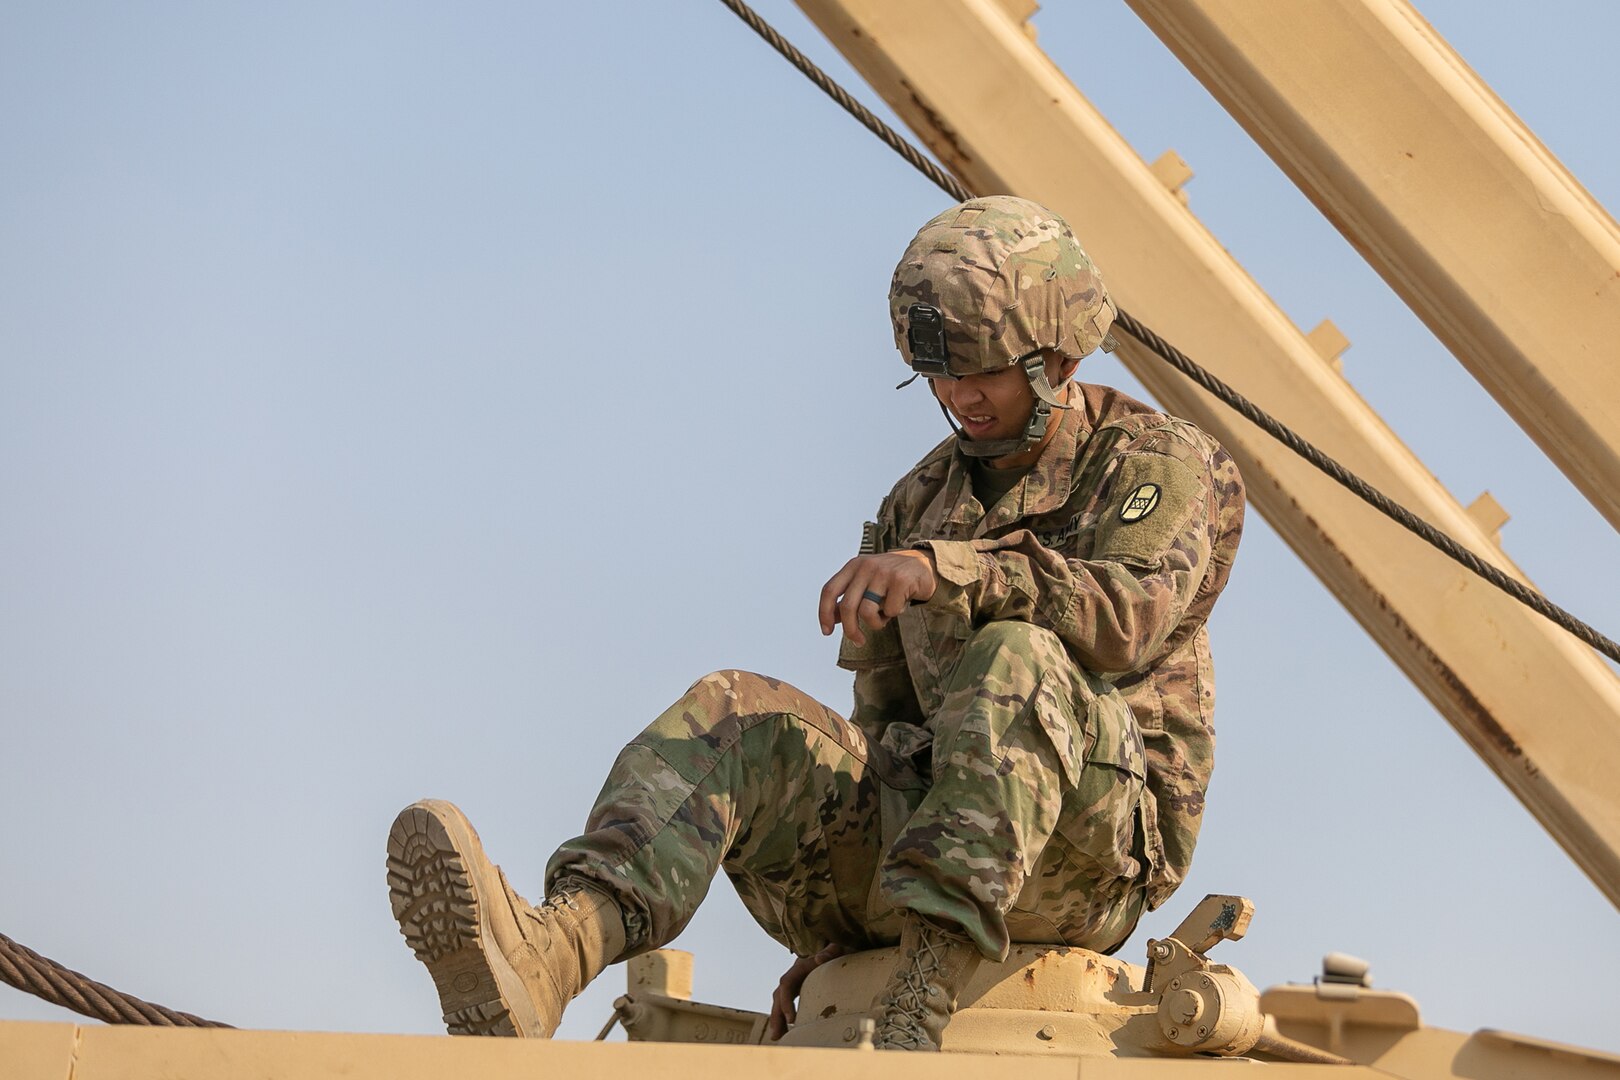 U.S. Army Spc. Roman Smith, a track mechanic in the 1-252 Armor Regiment, 30th Armored Brigade Combat Team, North Carolina Army National Guard, works on track vehicle equipment in Kuwait, Nov. 25, 2019. This is Smith’s first deployment and the first time he will be missing the holidays with his family while supporting Operation Spartan Shield.